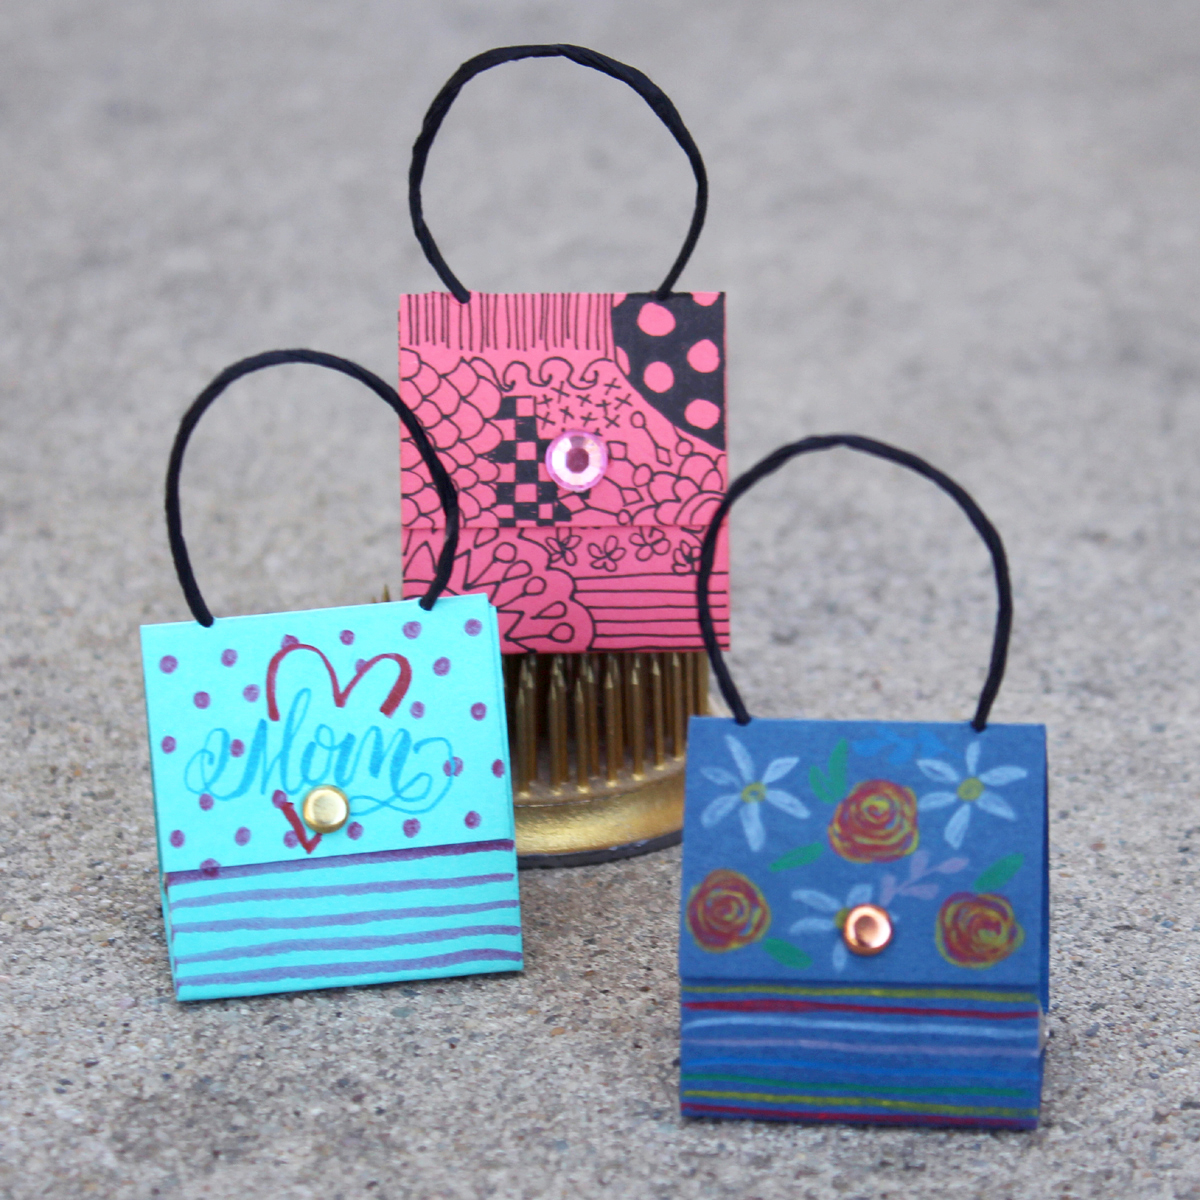 Mini Purse Hershey's Nuggets Paper favors perfect for Mother's day, party favors or cute place settings